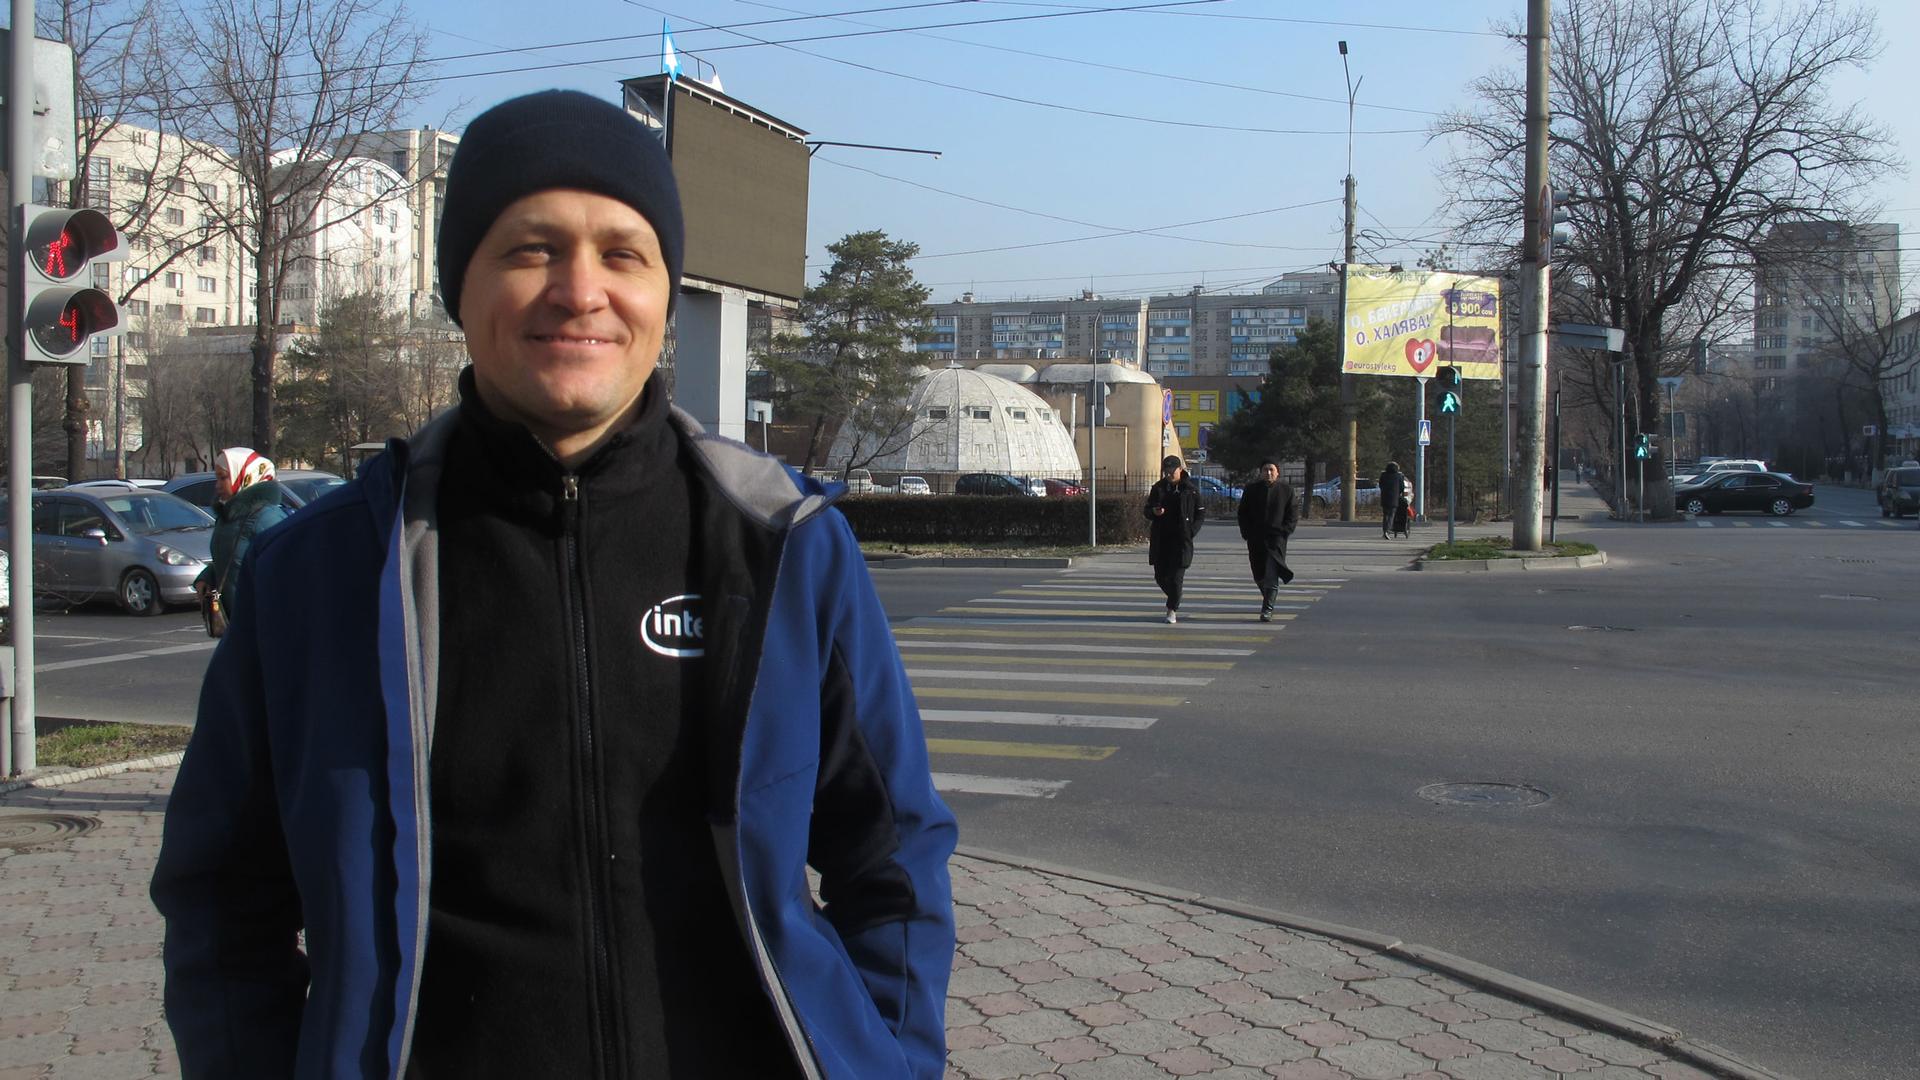 Citizen scientist Pavel Plotitsyn is on a mission to help citizens gauge air quality in Central Asia, where air pollution is a health major hazard.